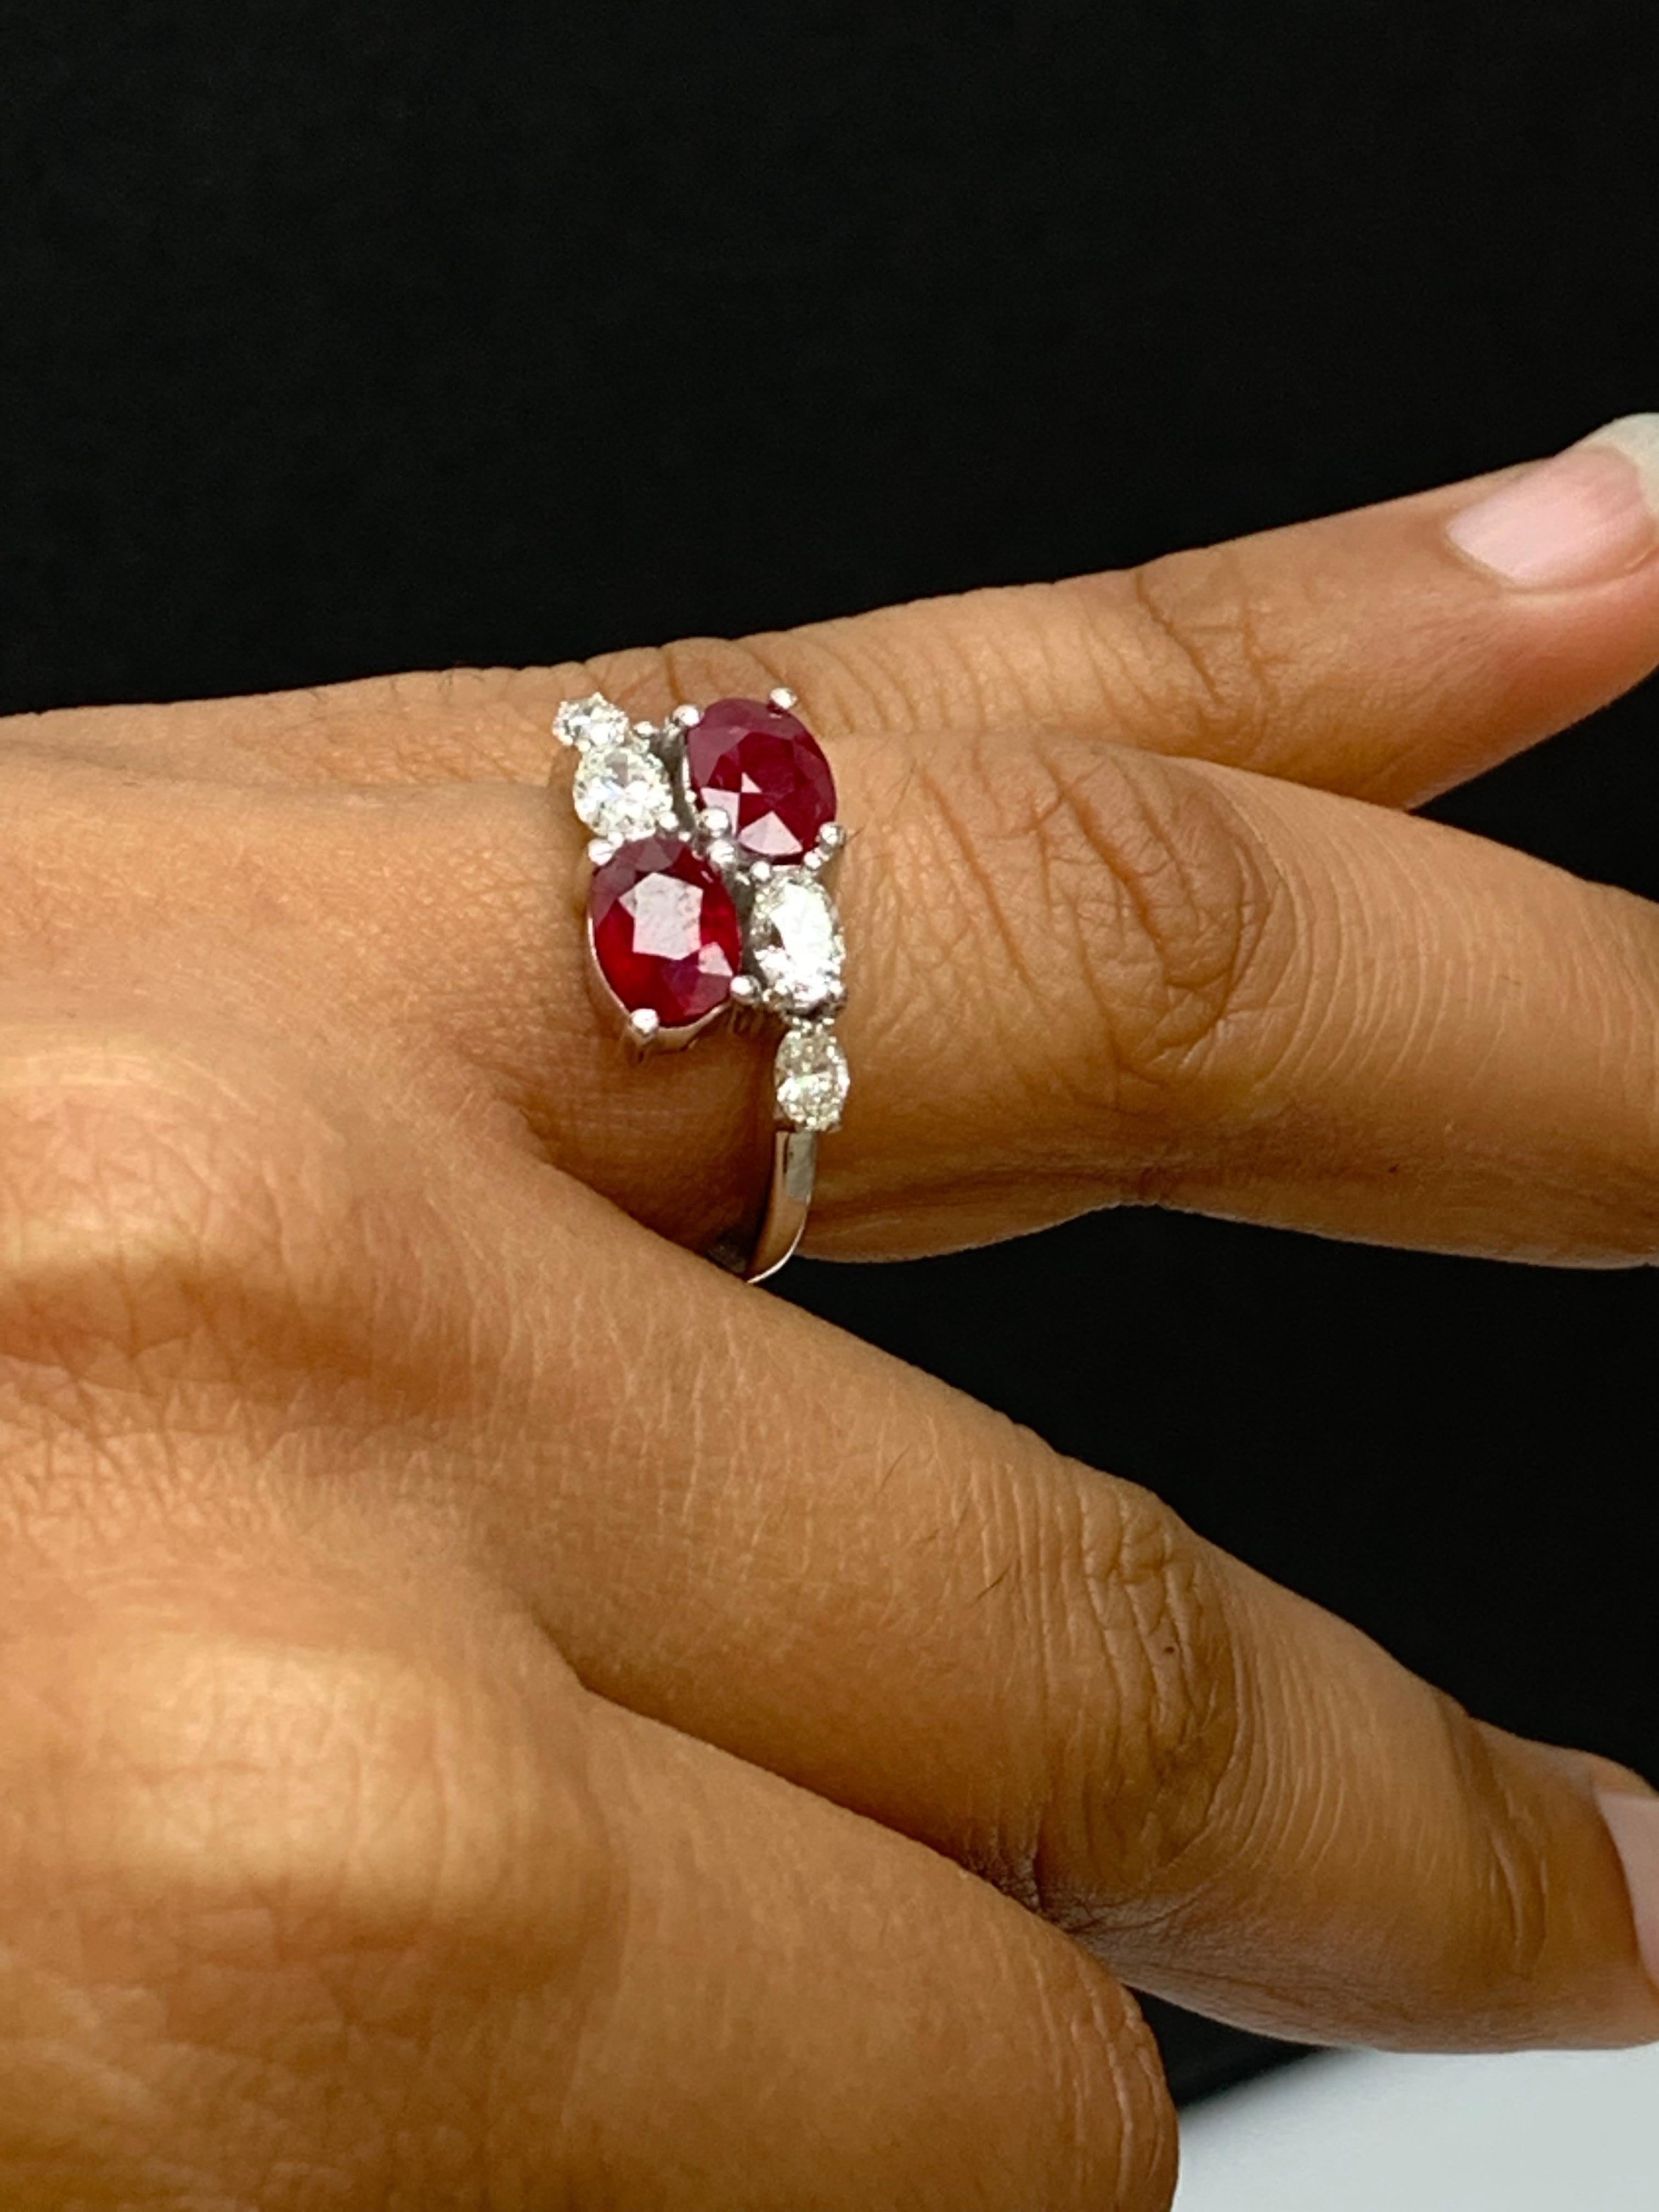 Women's 1.54 Carat Oval Cut Ruby Diamond Toi Et Moi Engagement Ring in 14K White Gold For Sale